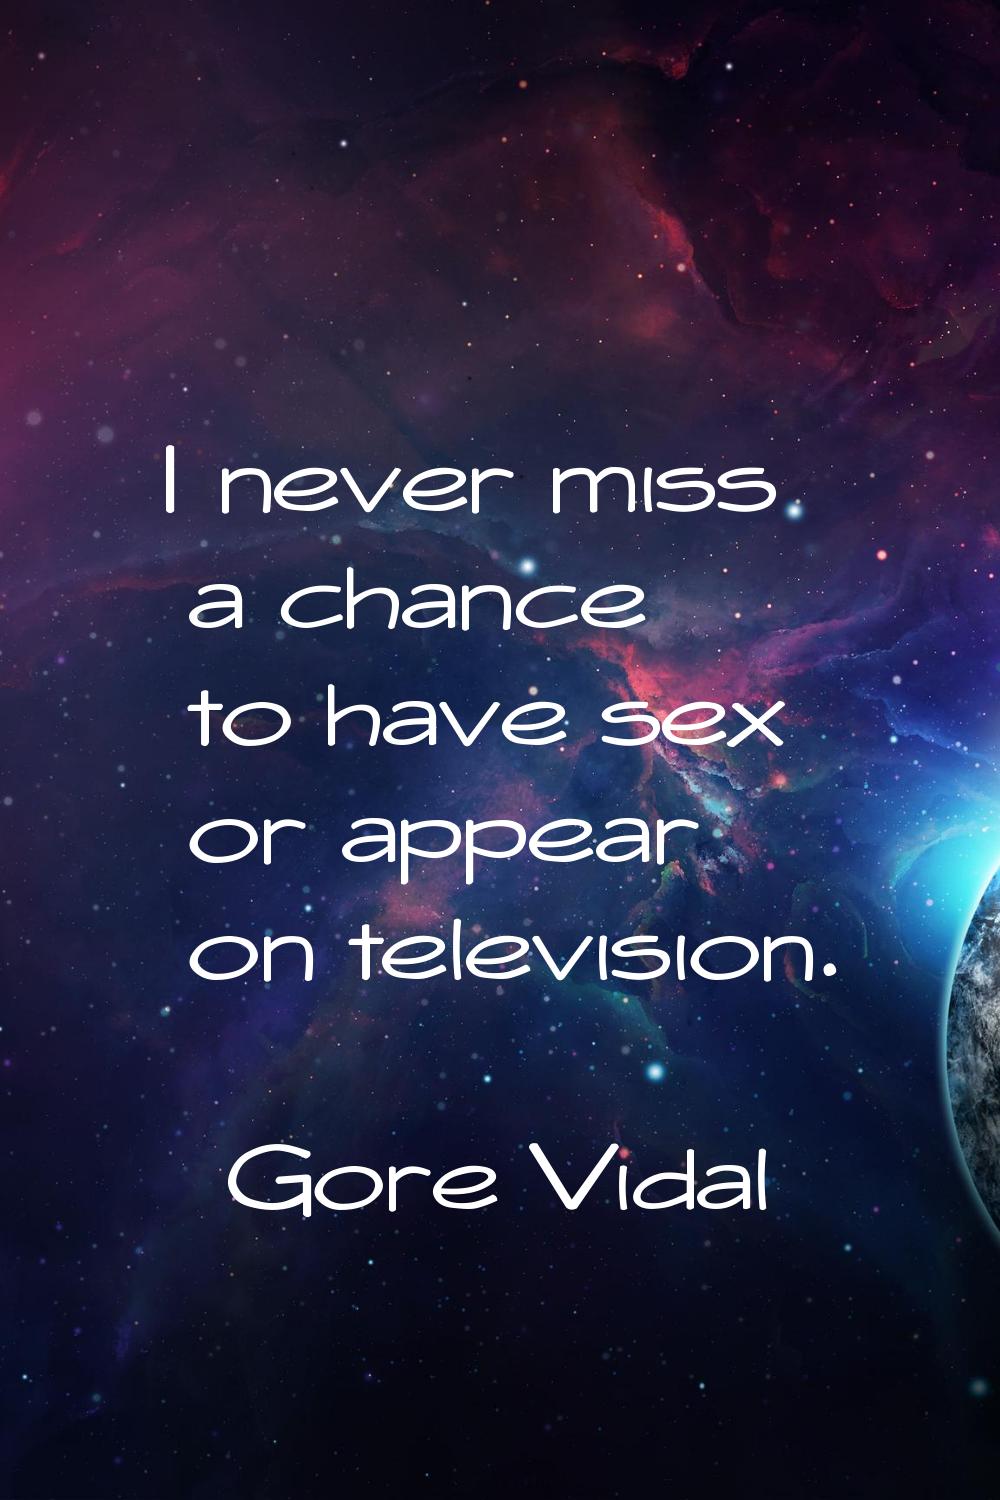 I never miss a chance to have sex or appear on television.